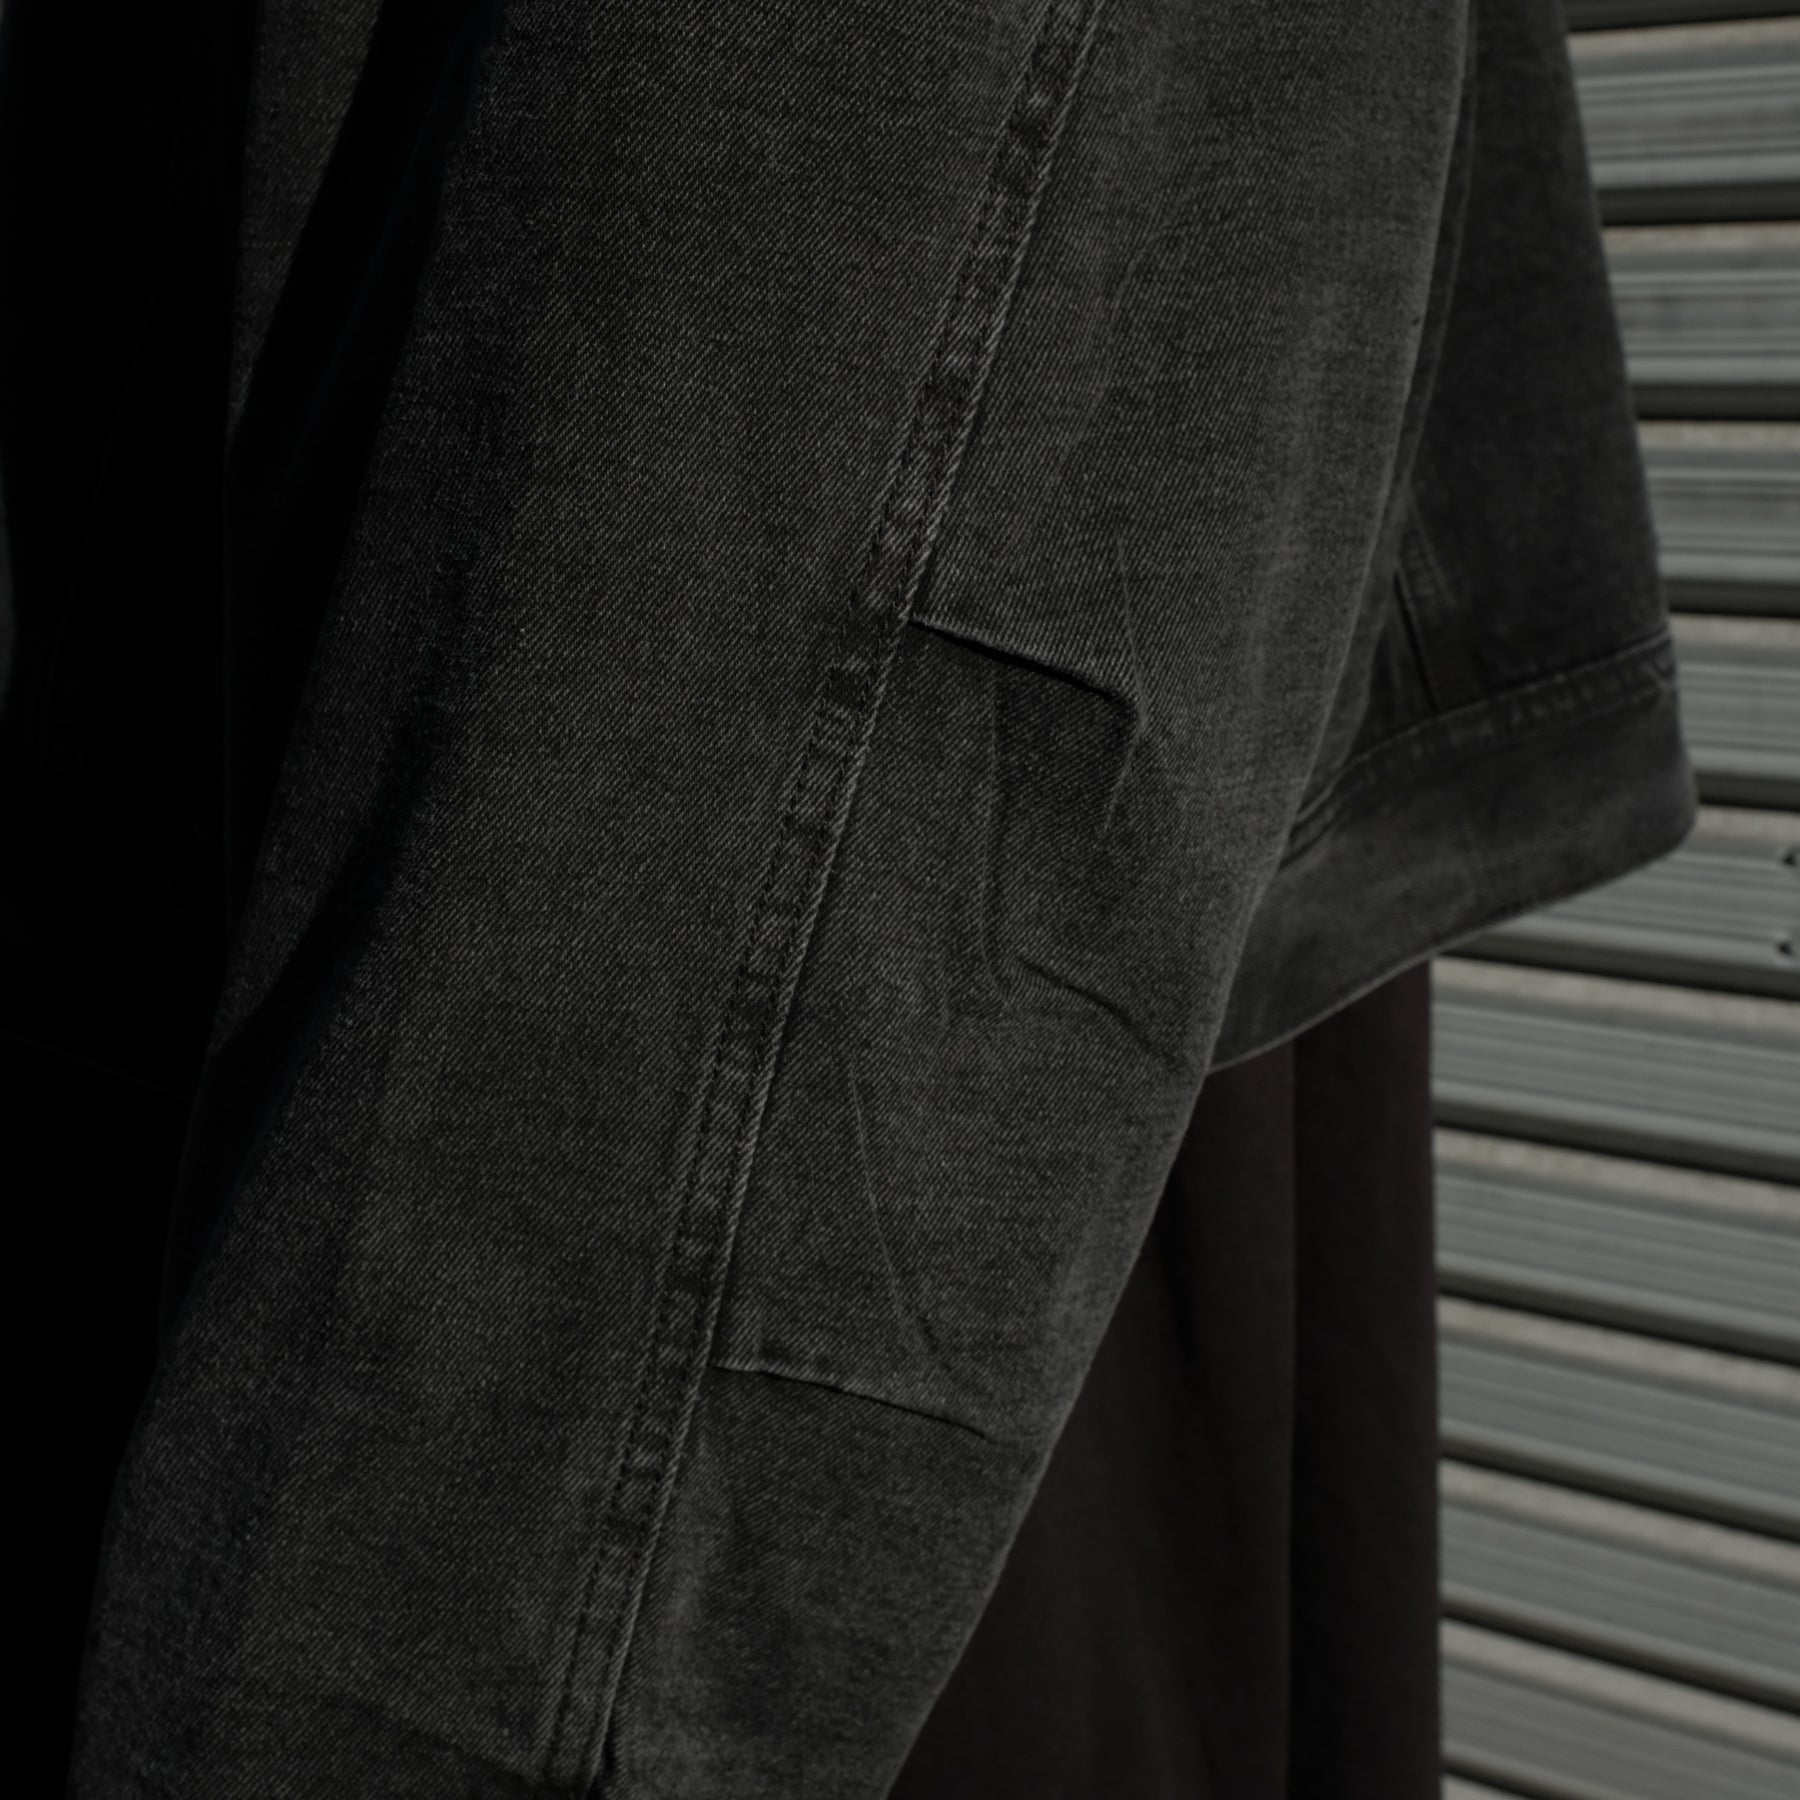 WILLY CHAVARRIA / DENIM + FRENCH TERRY JACKET WASHED BLACK